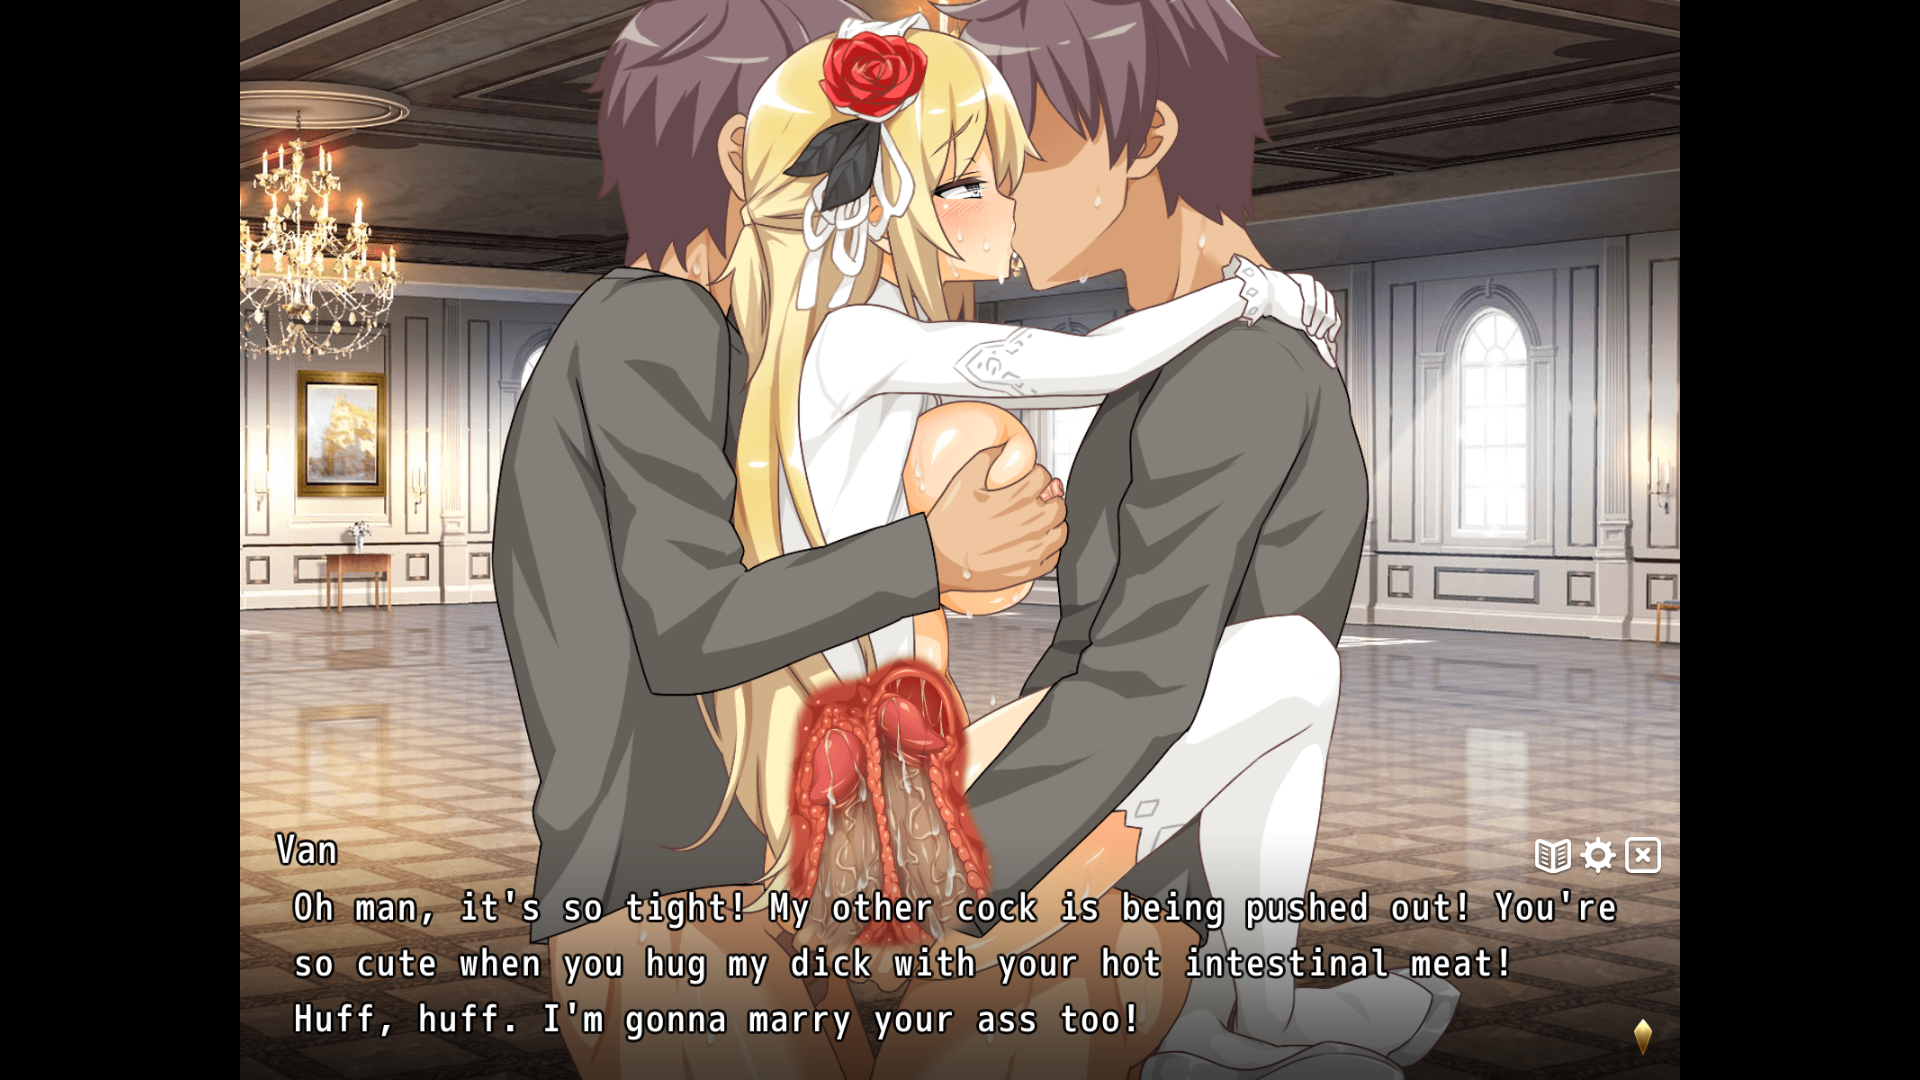 Hentai Kissing Lesbian Succubhs - The Demon Lord is New in Town! [COMPLETED] - free game download, reviews,  mega - xGames